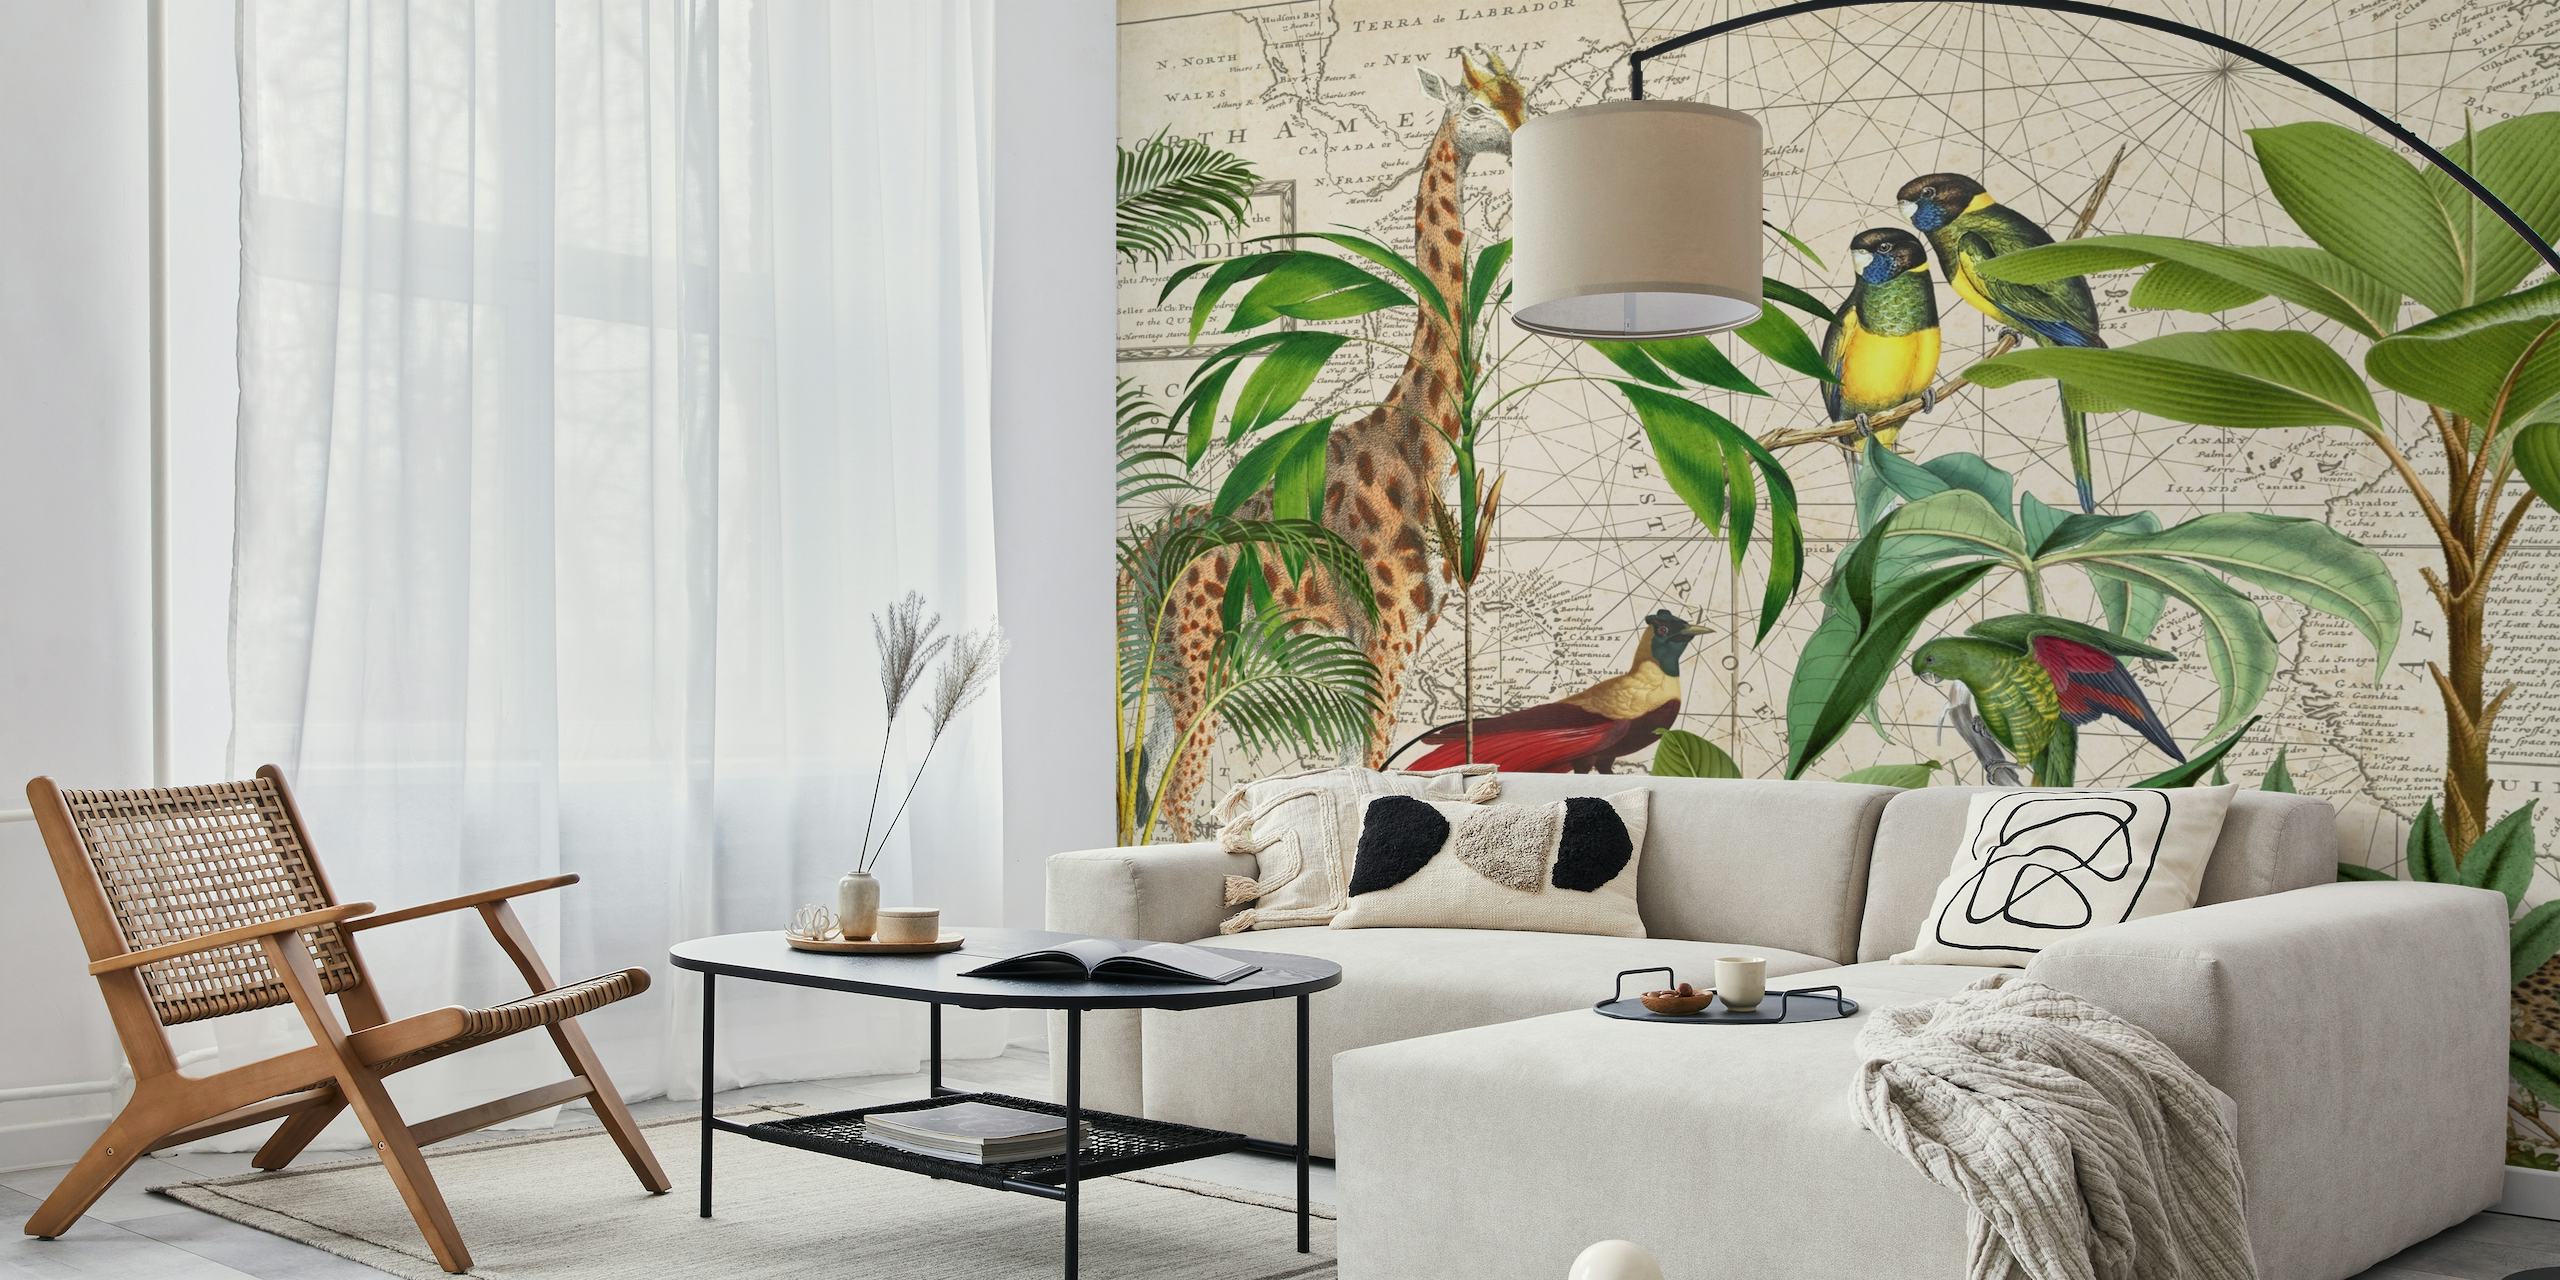 Illustrative wall mural featuring giraffe, exotic birds, and tropical plants on a map background